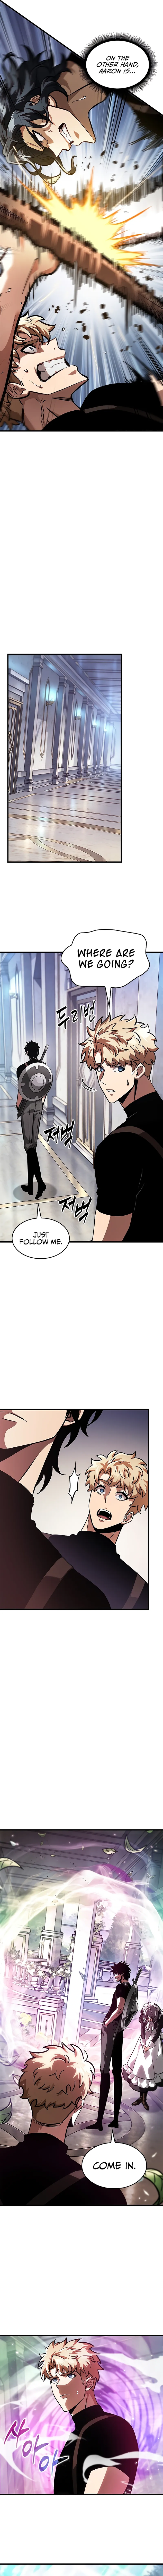 Pick Me Up Chapter 88 page 5